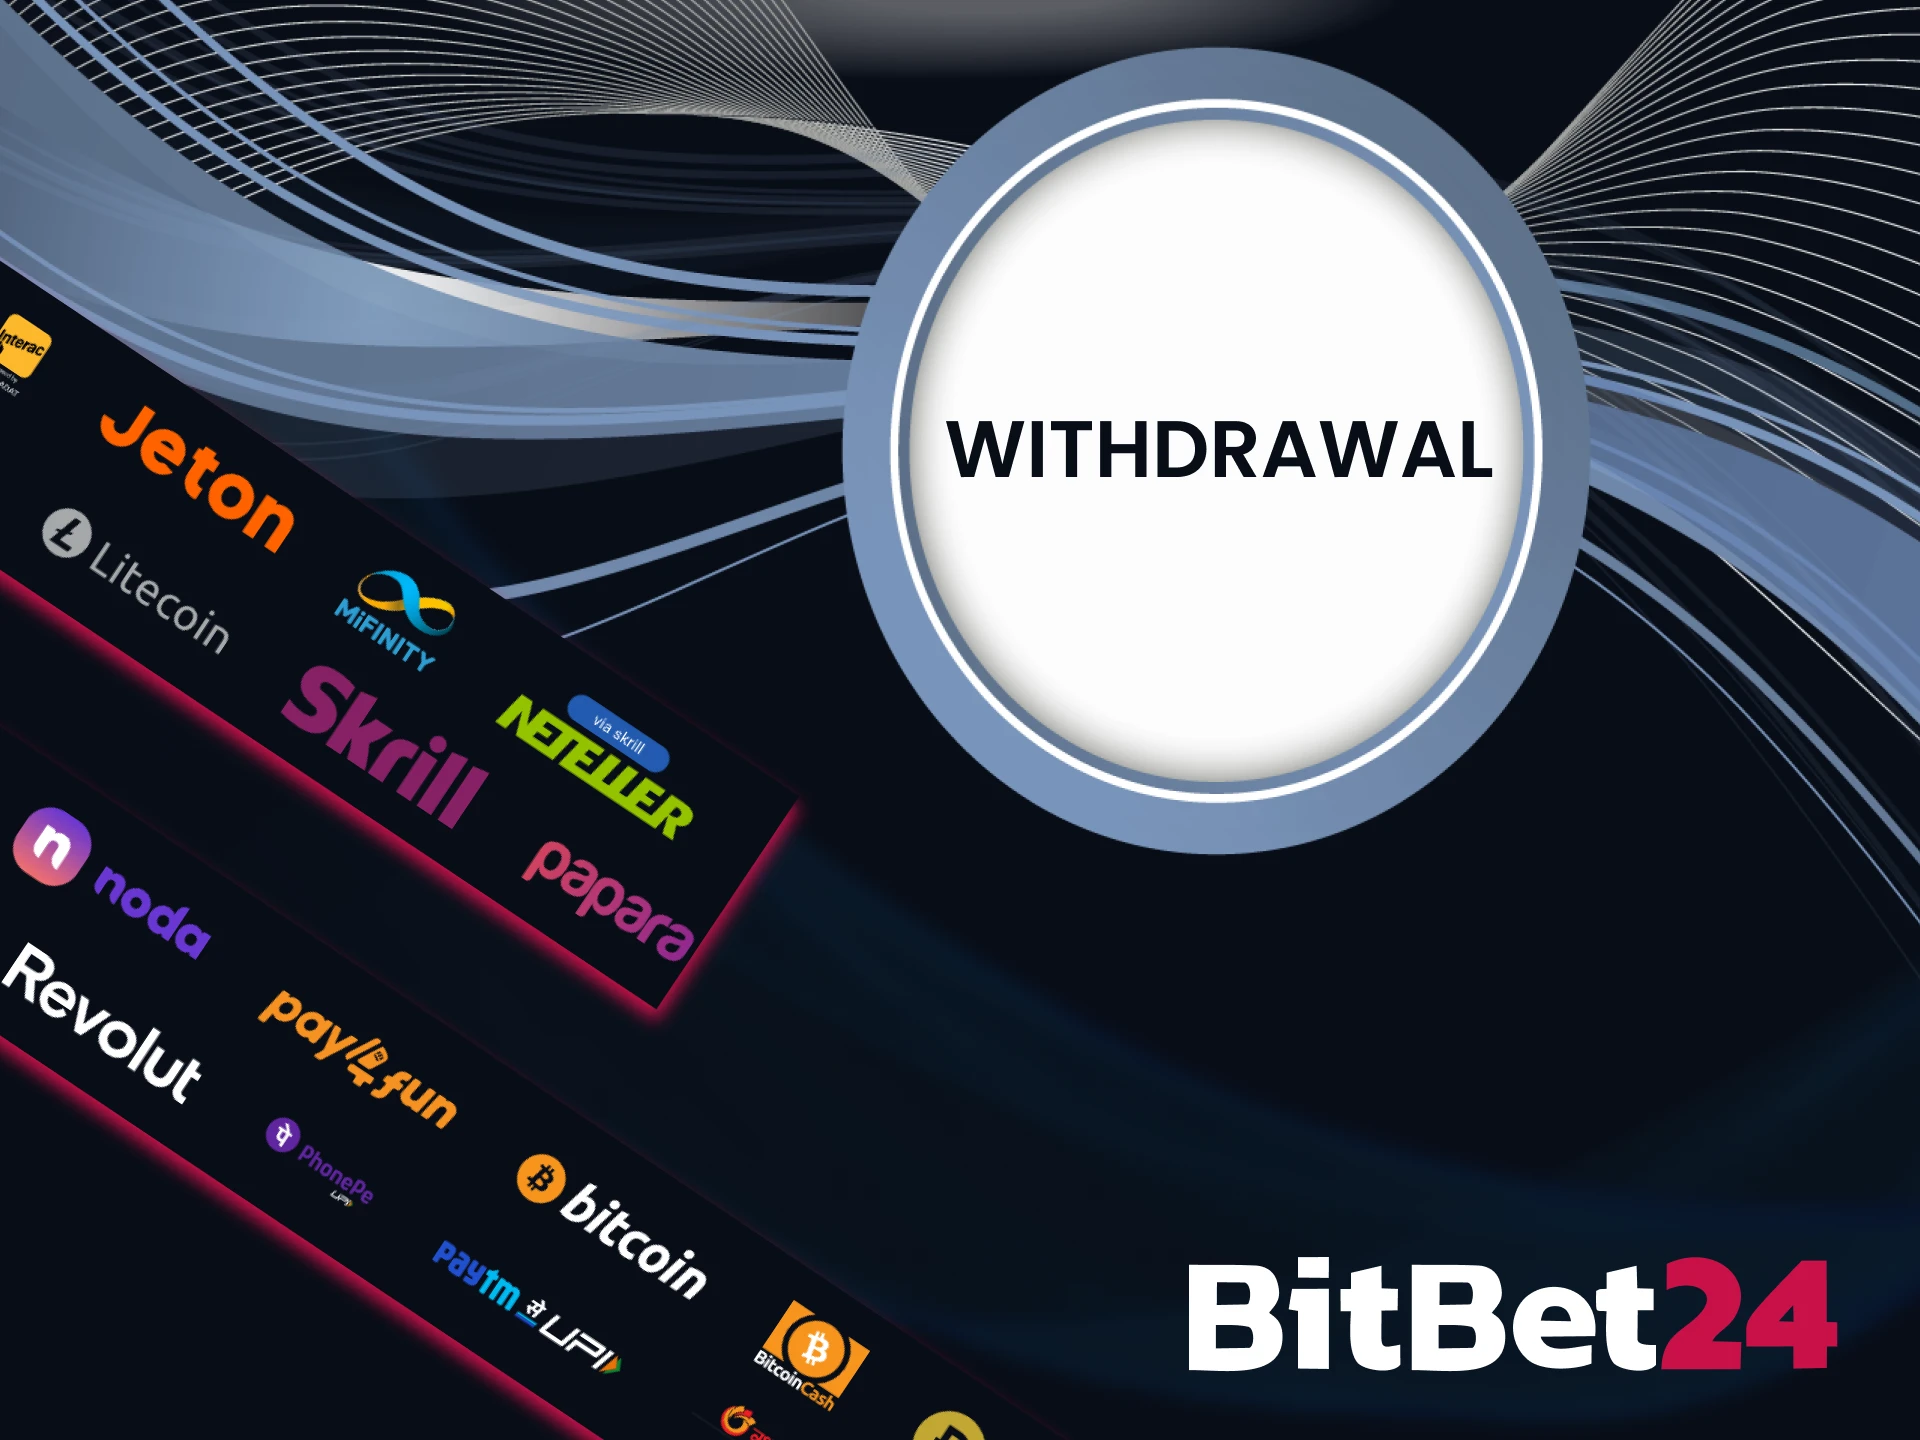 Easily withdraw your money from BitBet24.